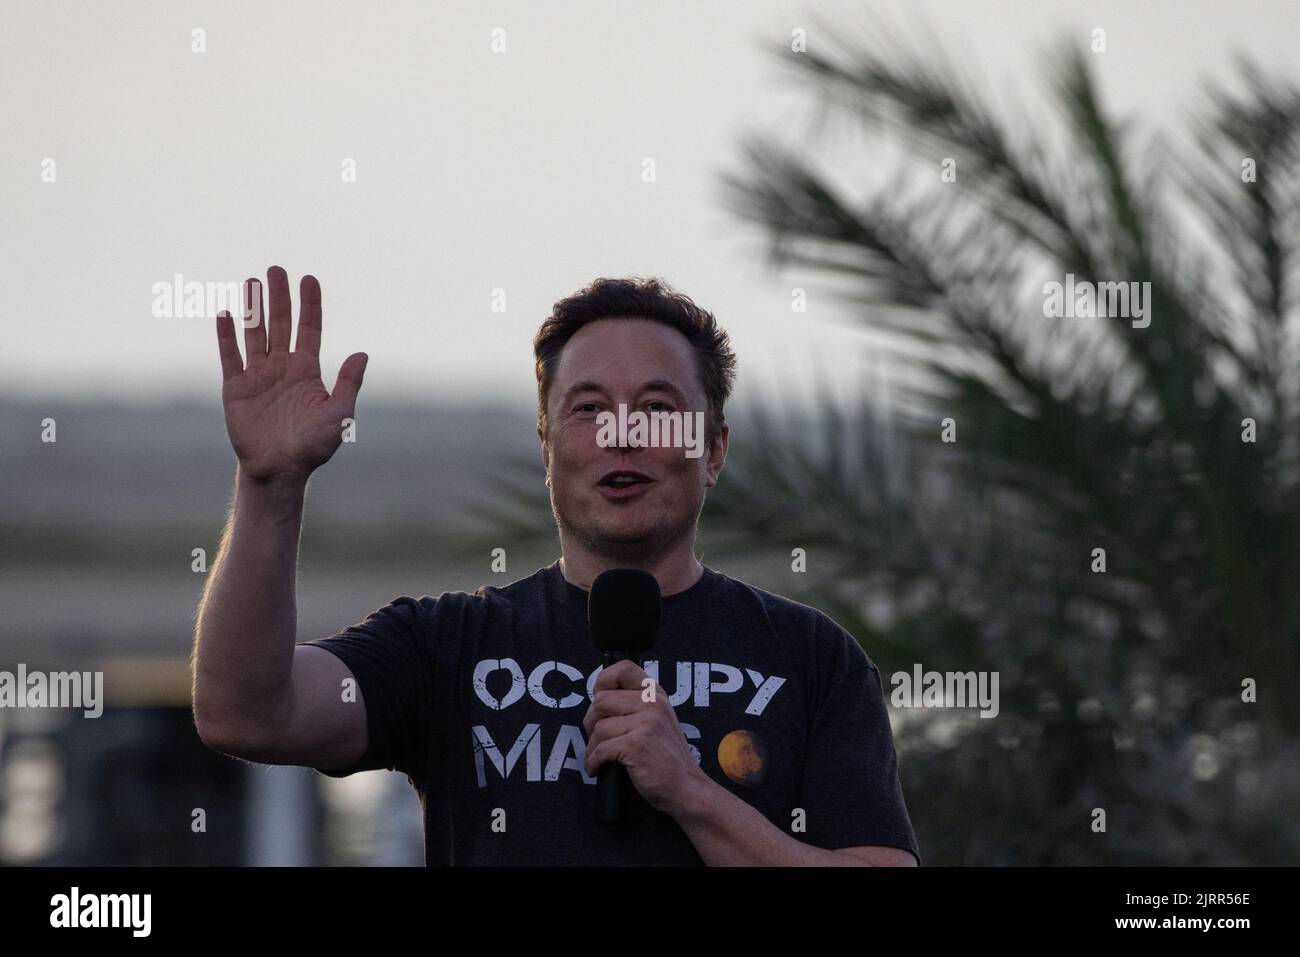 SpaceX Chief Engineer Elon Musk gestures during a joint news conference with T-Mobile CEO Mike Sievert at the SpaceX Starbase, in Brownsville, Texas, U.S., August 25, 2022. REUTERS/Adrees Latif Stock Photo